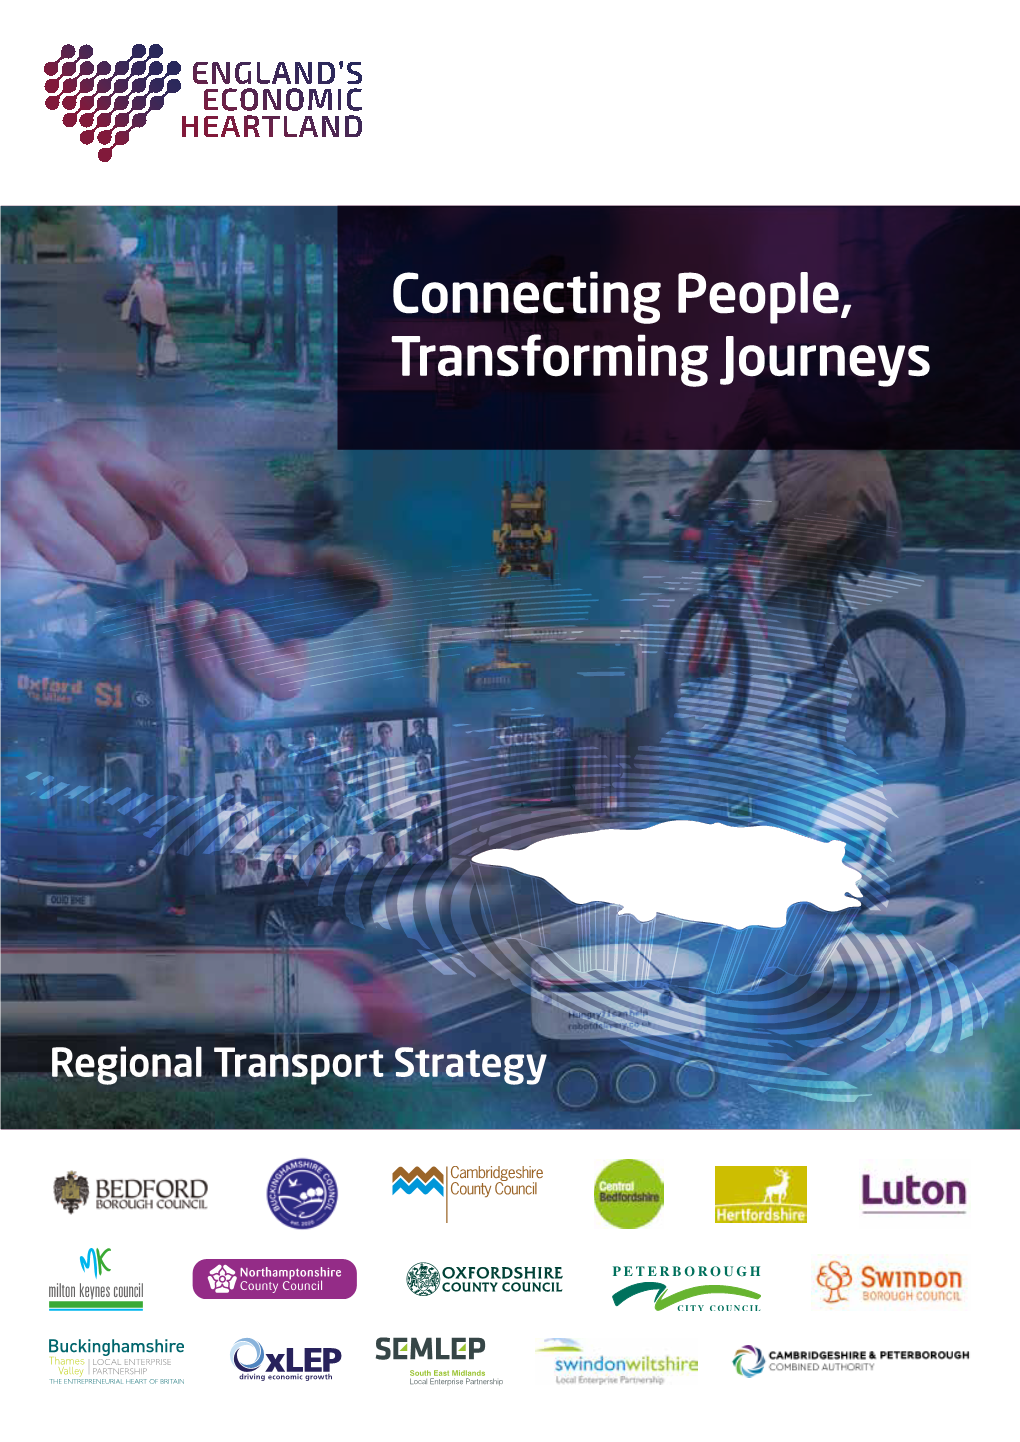 Connecting People, Transforming Journeys